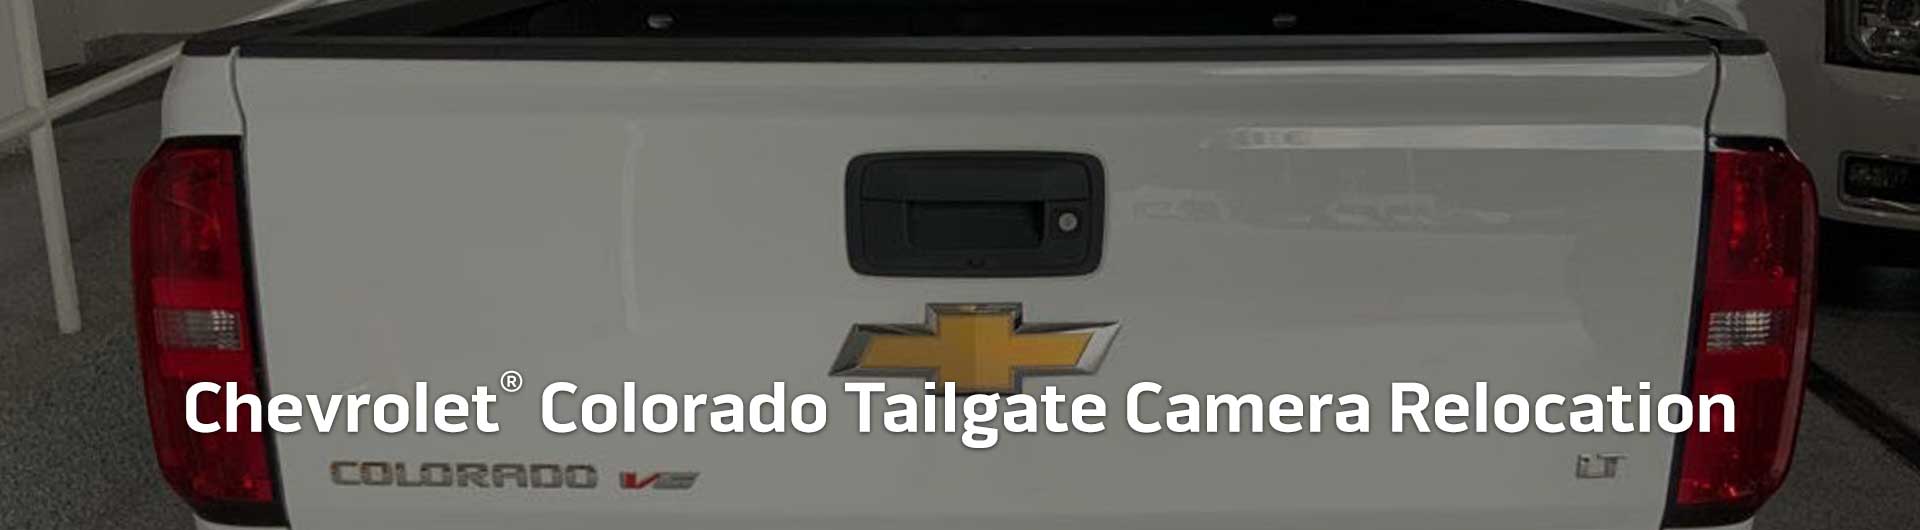 An image showing the tailgate handle of a Chevrolet Colorado with a built-in backup camera.